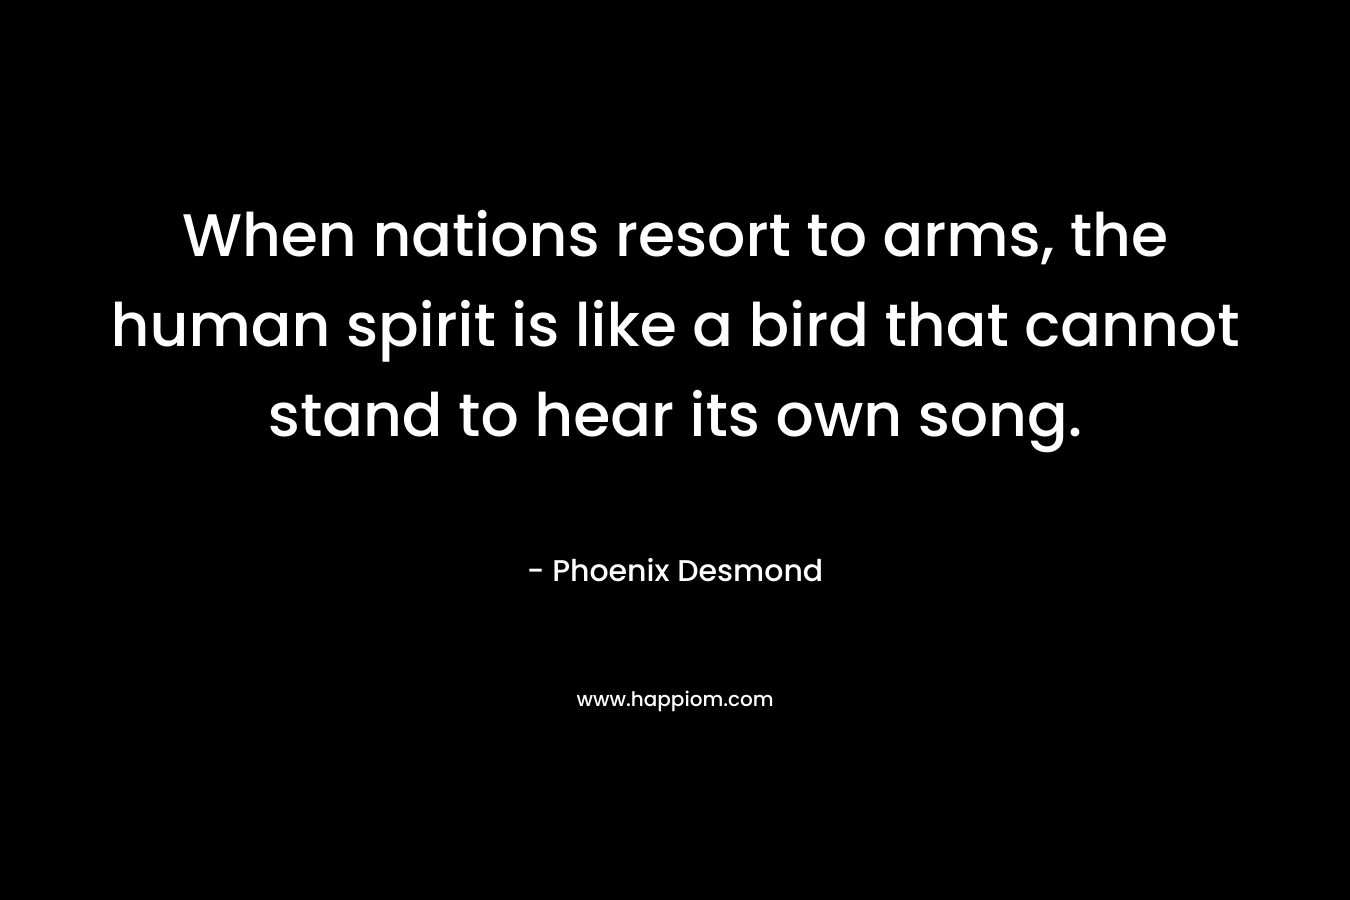 When nations resort to arms, the human spirit is like a bird that cannot stand to hear its own song.